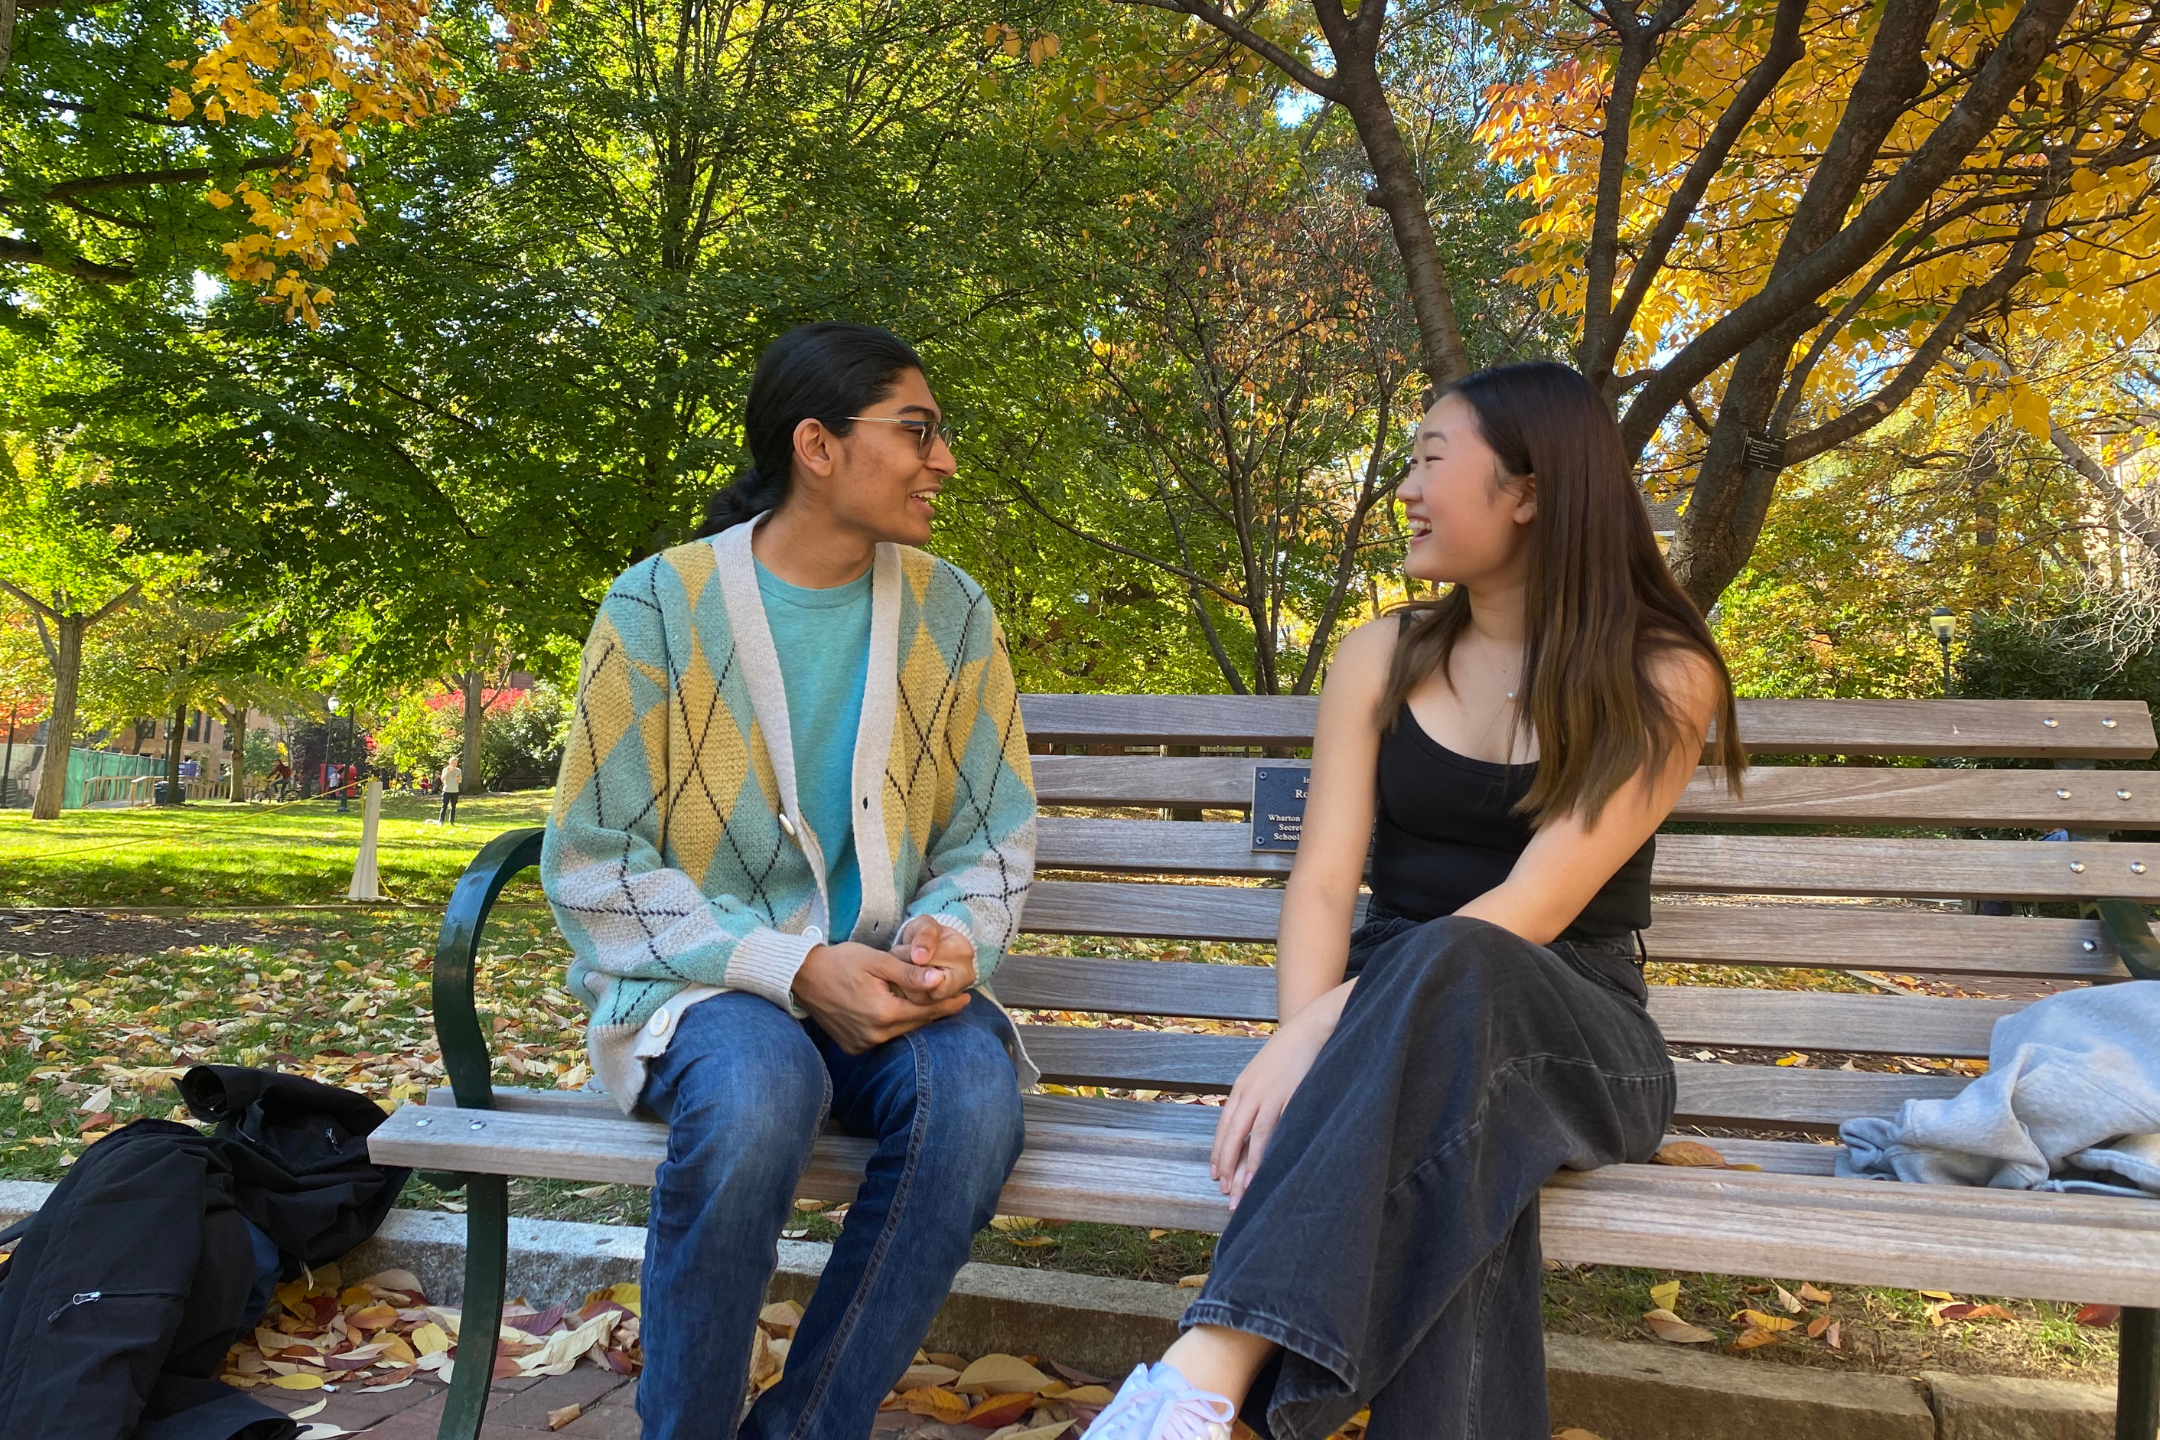 Two students sit on a bench near a tree on a sunny autumn day, talking enthusiastically to each other.